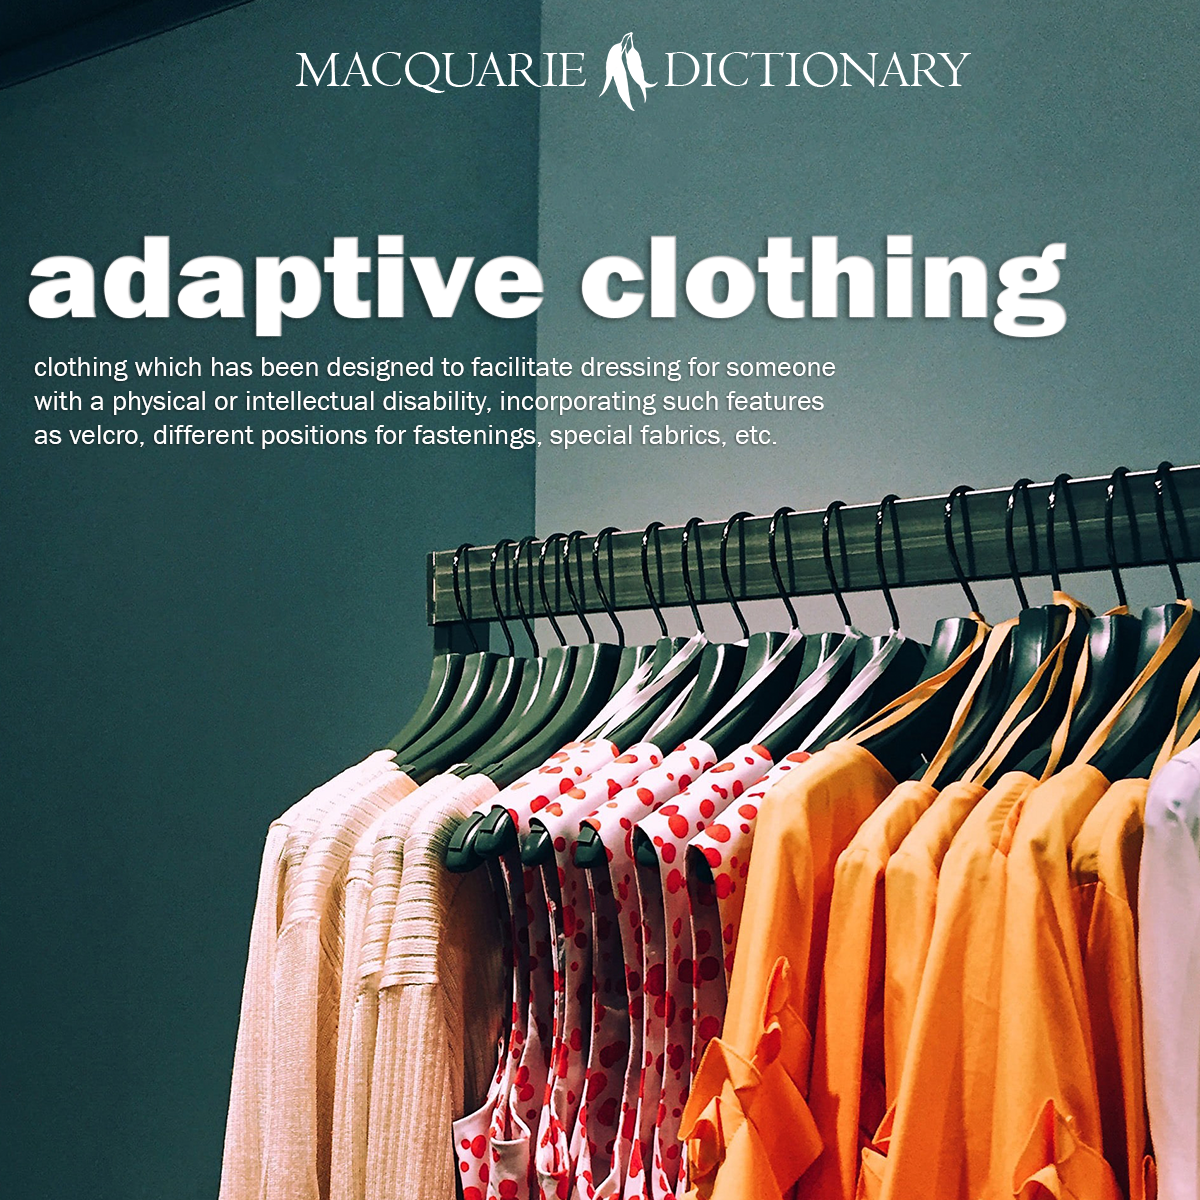 adaptive clothing - clothing which has been designed to facilitate dressing for someone with a physical or intellectual disability, incorporating such features as velcro, different positions for fastenings, special fabrics, etc